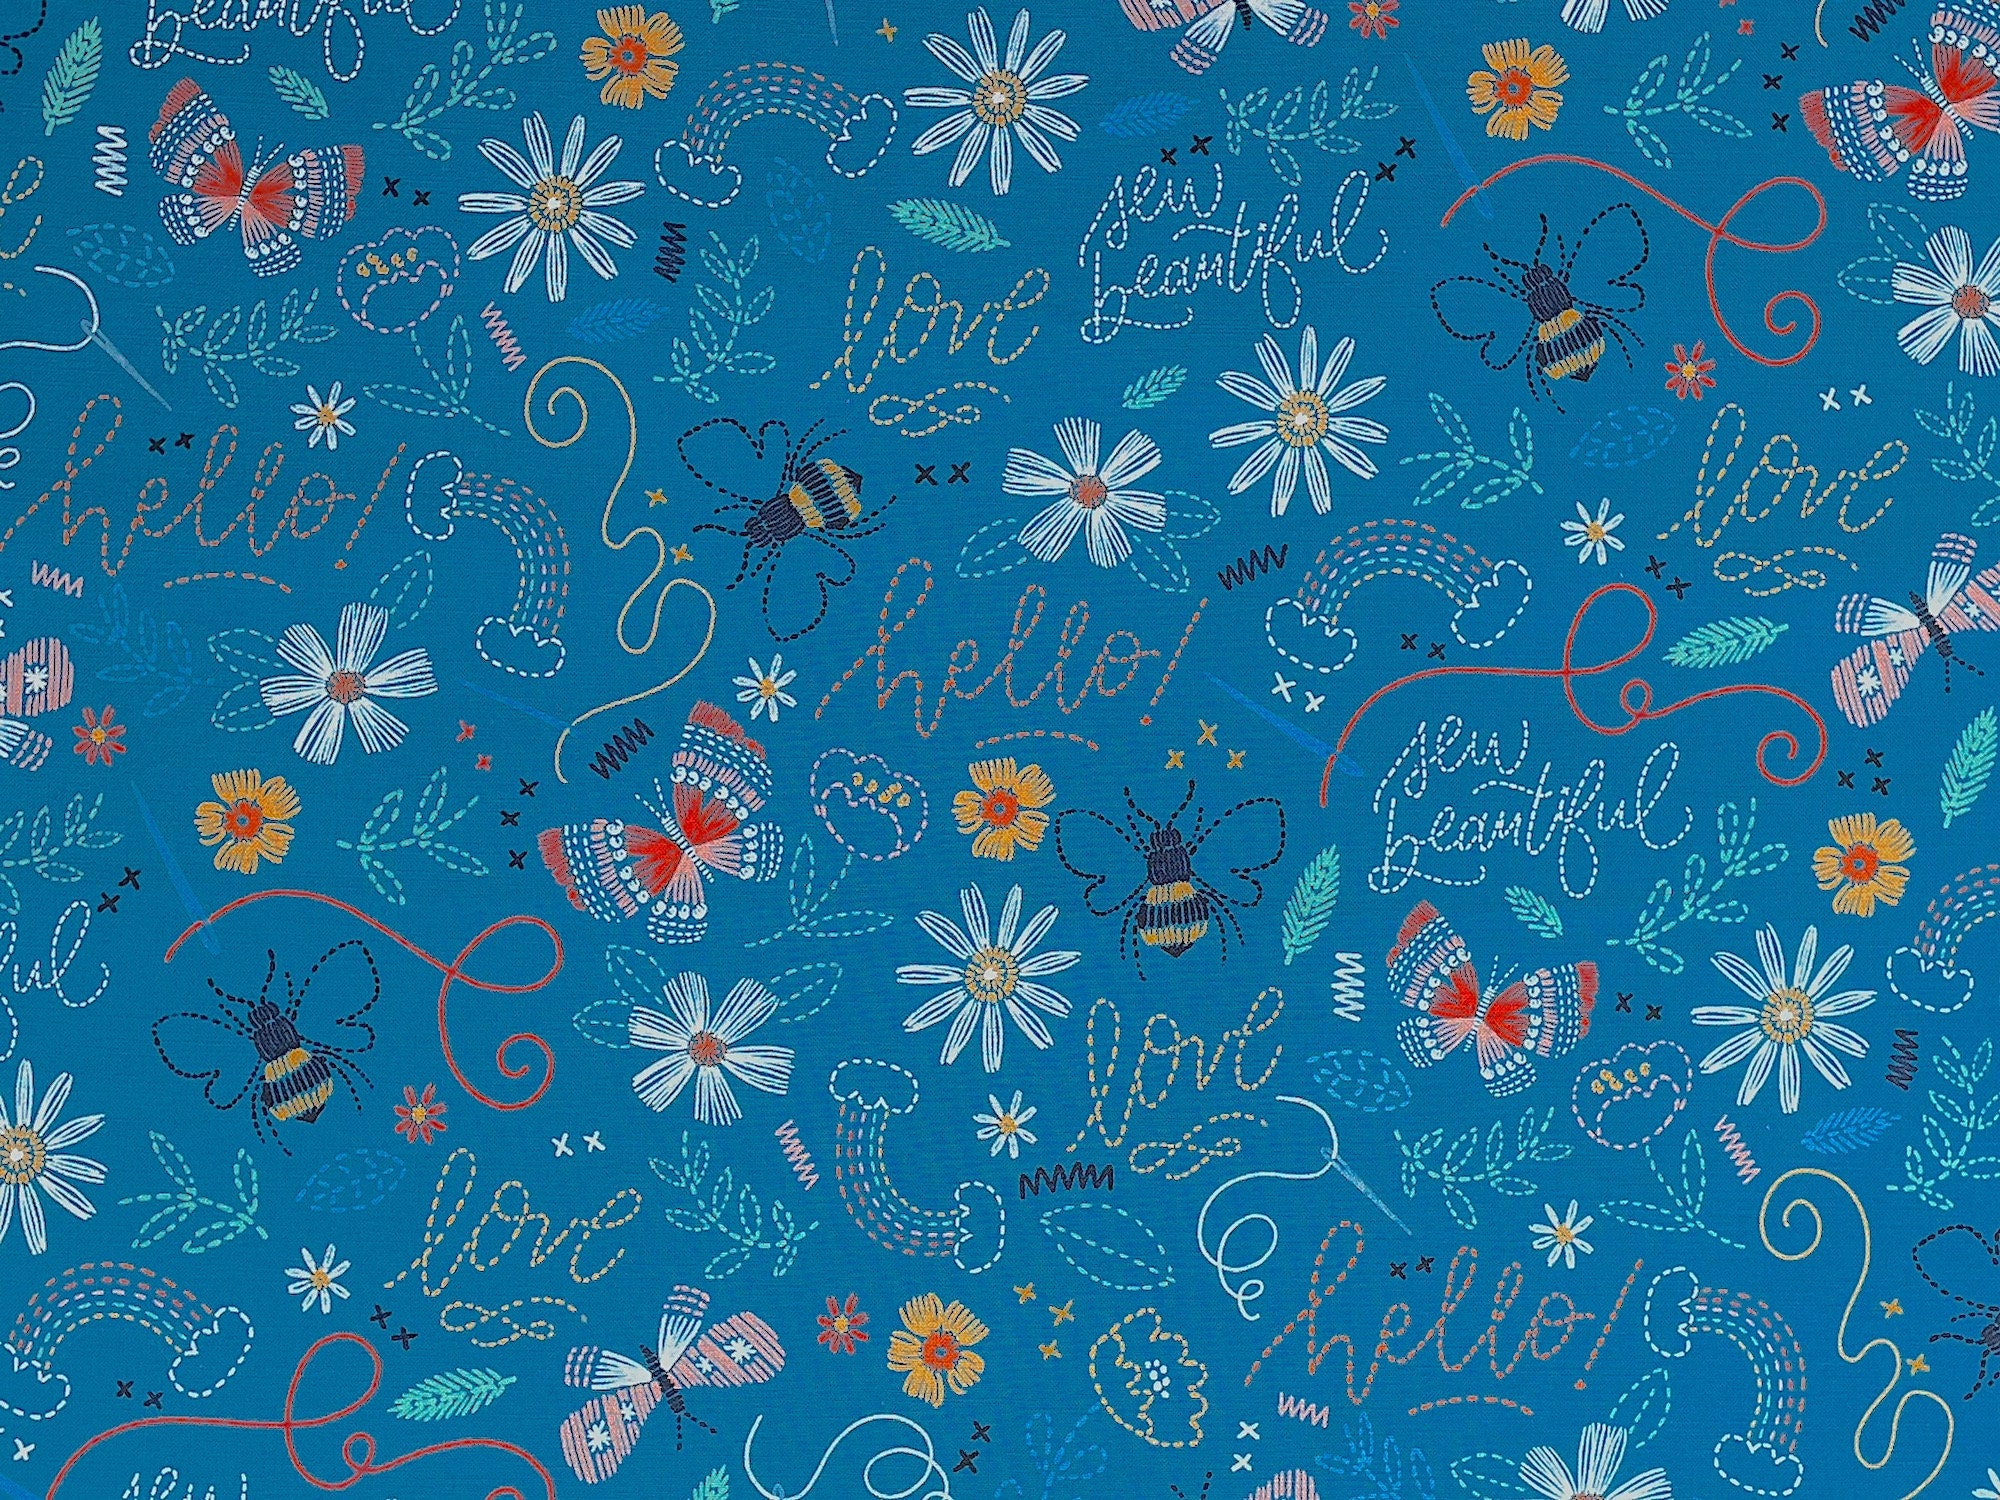 This turquoise blue fabric is covered with bees, butterflies, flowers rainbows and more. You will also find sayings such as love, sew beautiful, hello and more